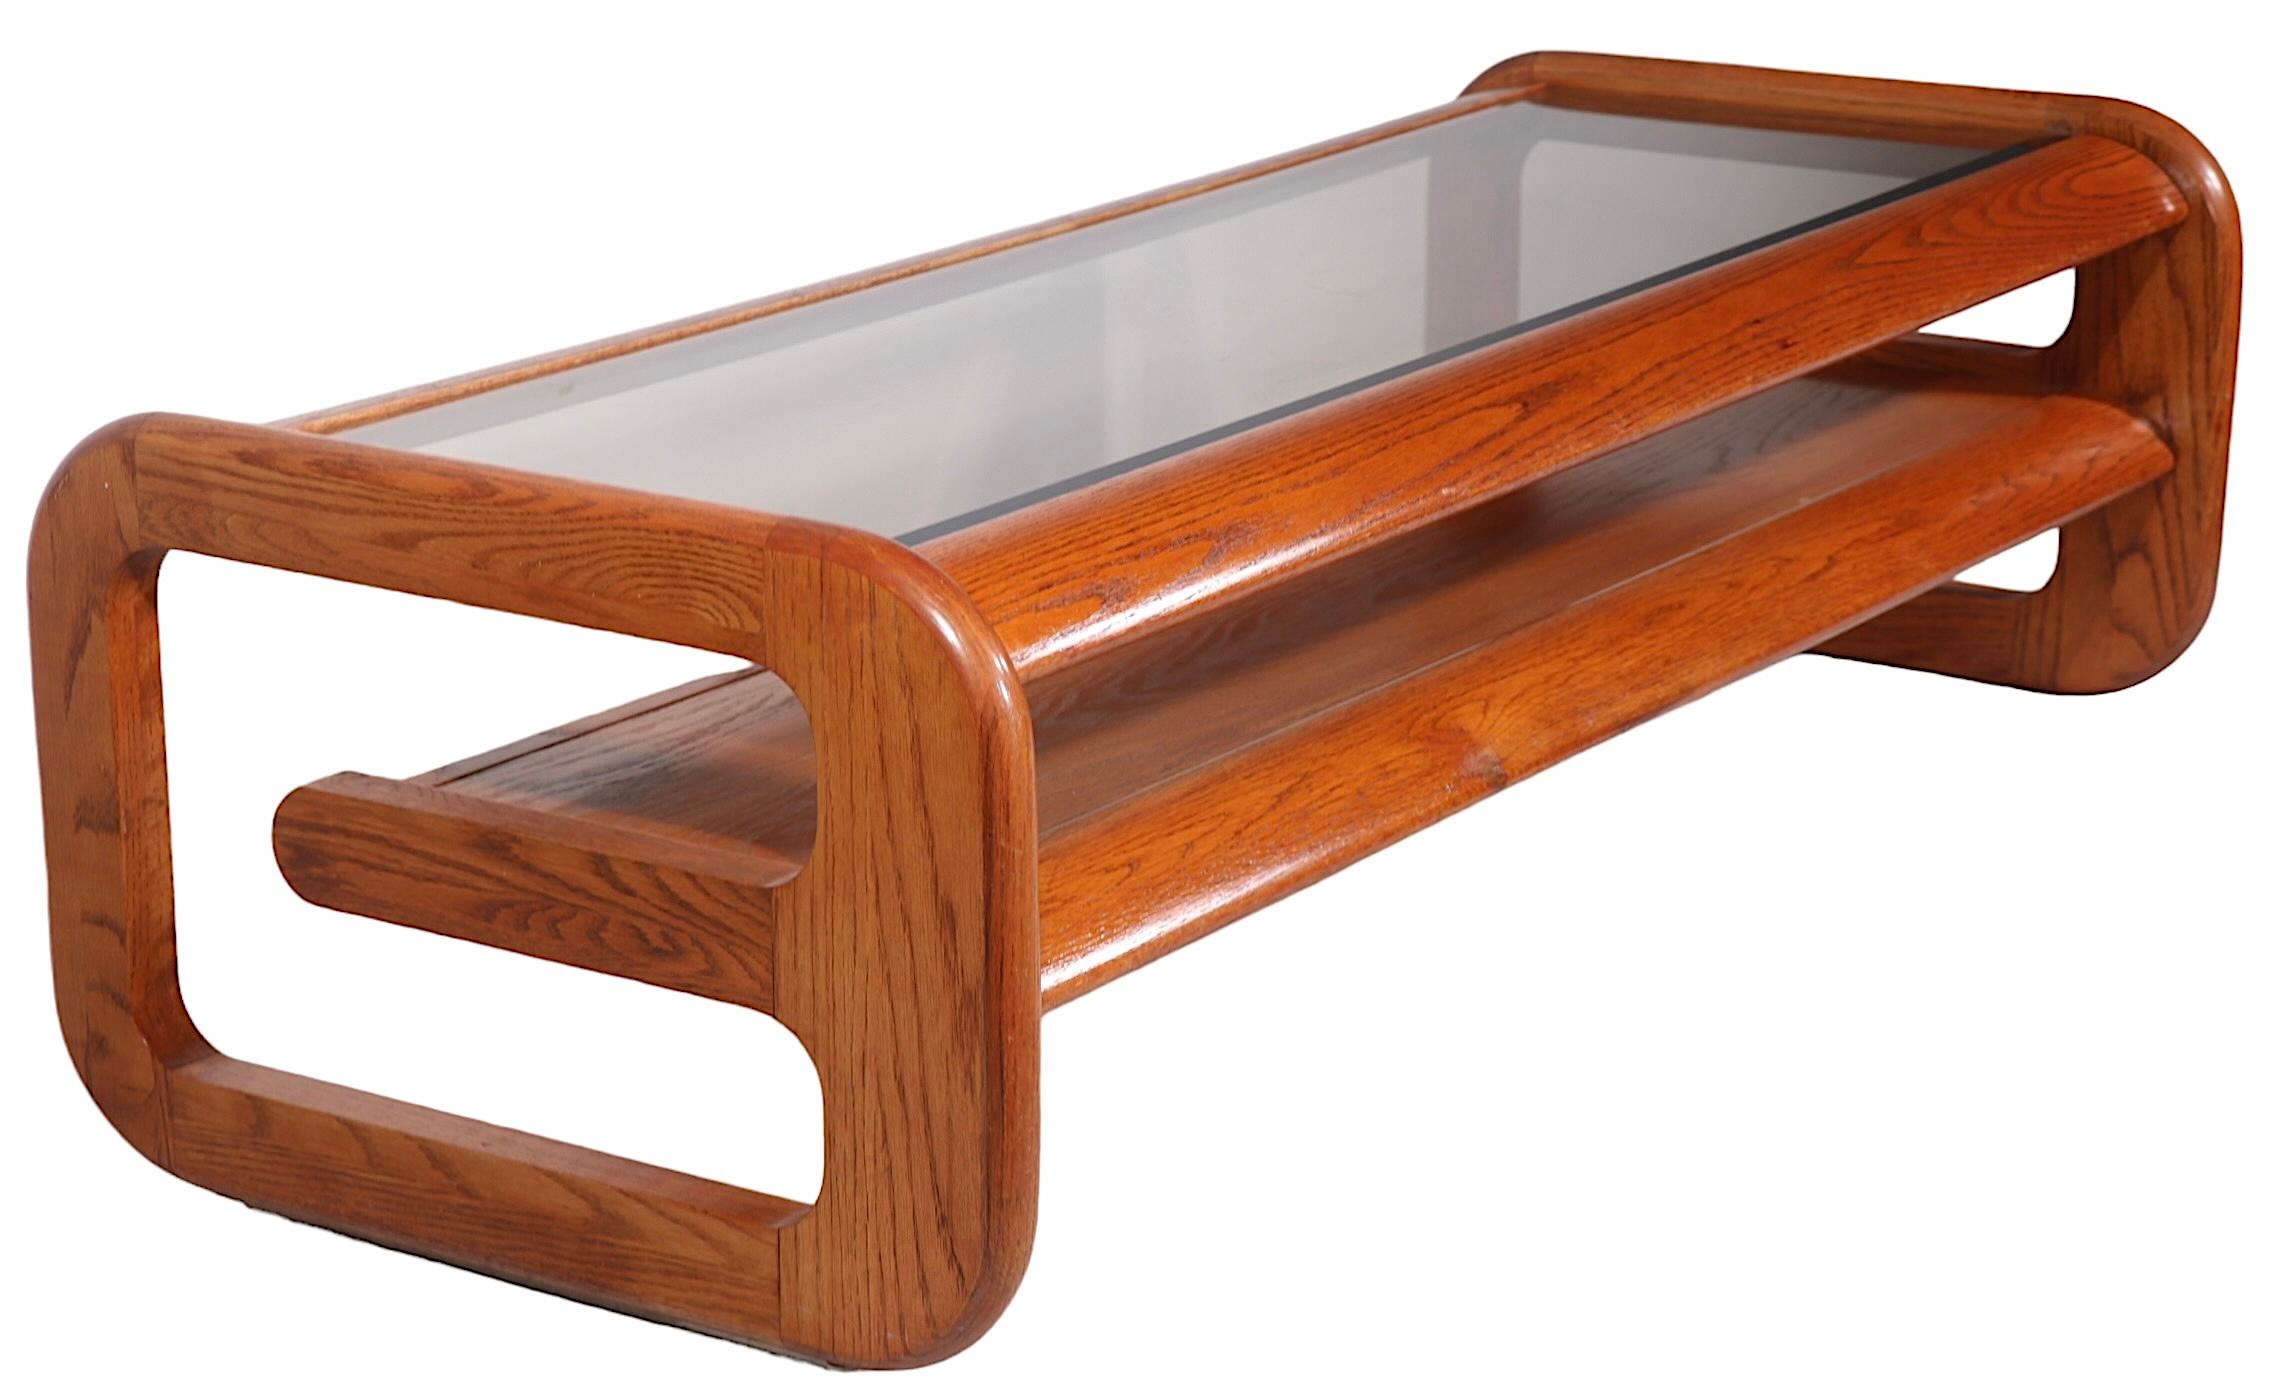  Post Modern Oak and Glass Coffee Table by Lou Hodges for Mersman  c. 1970's For Sale 1